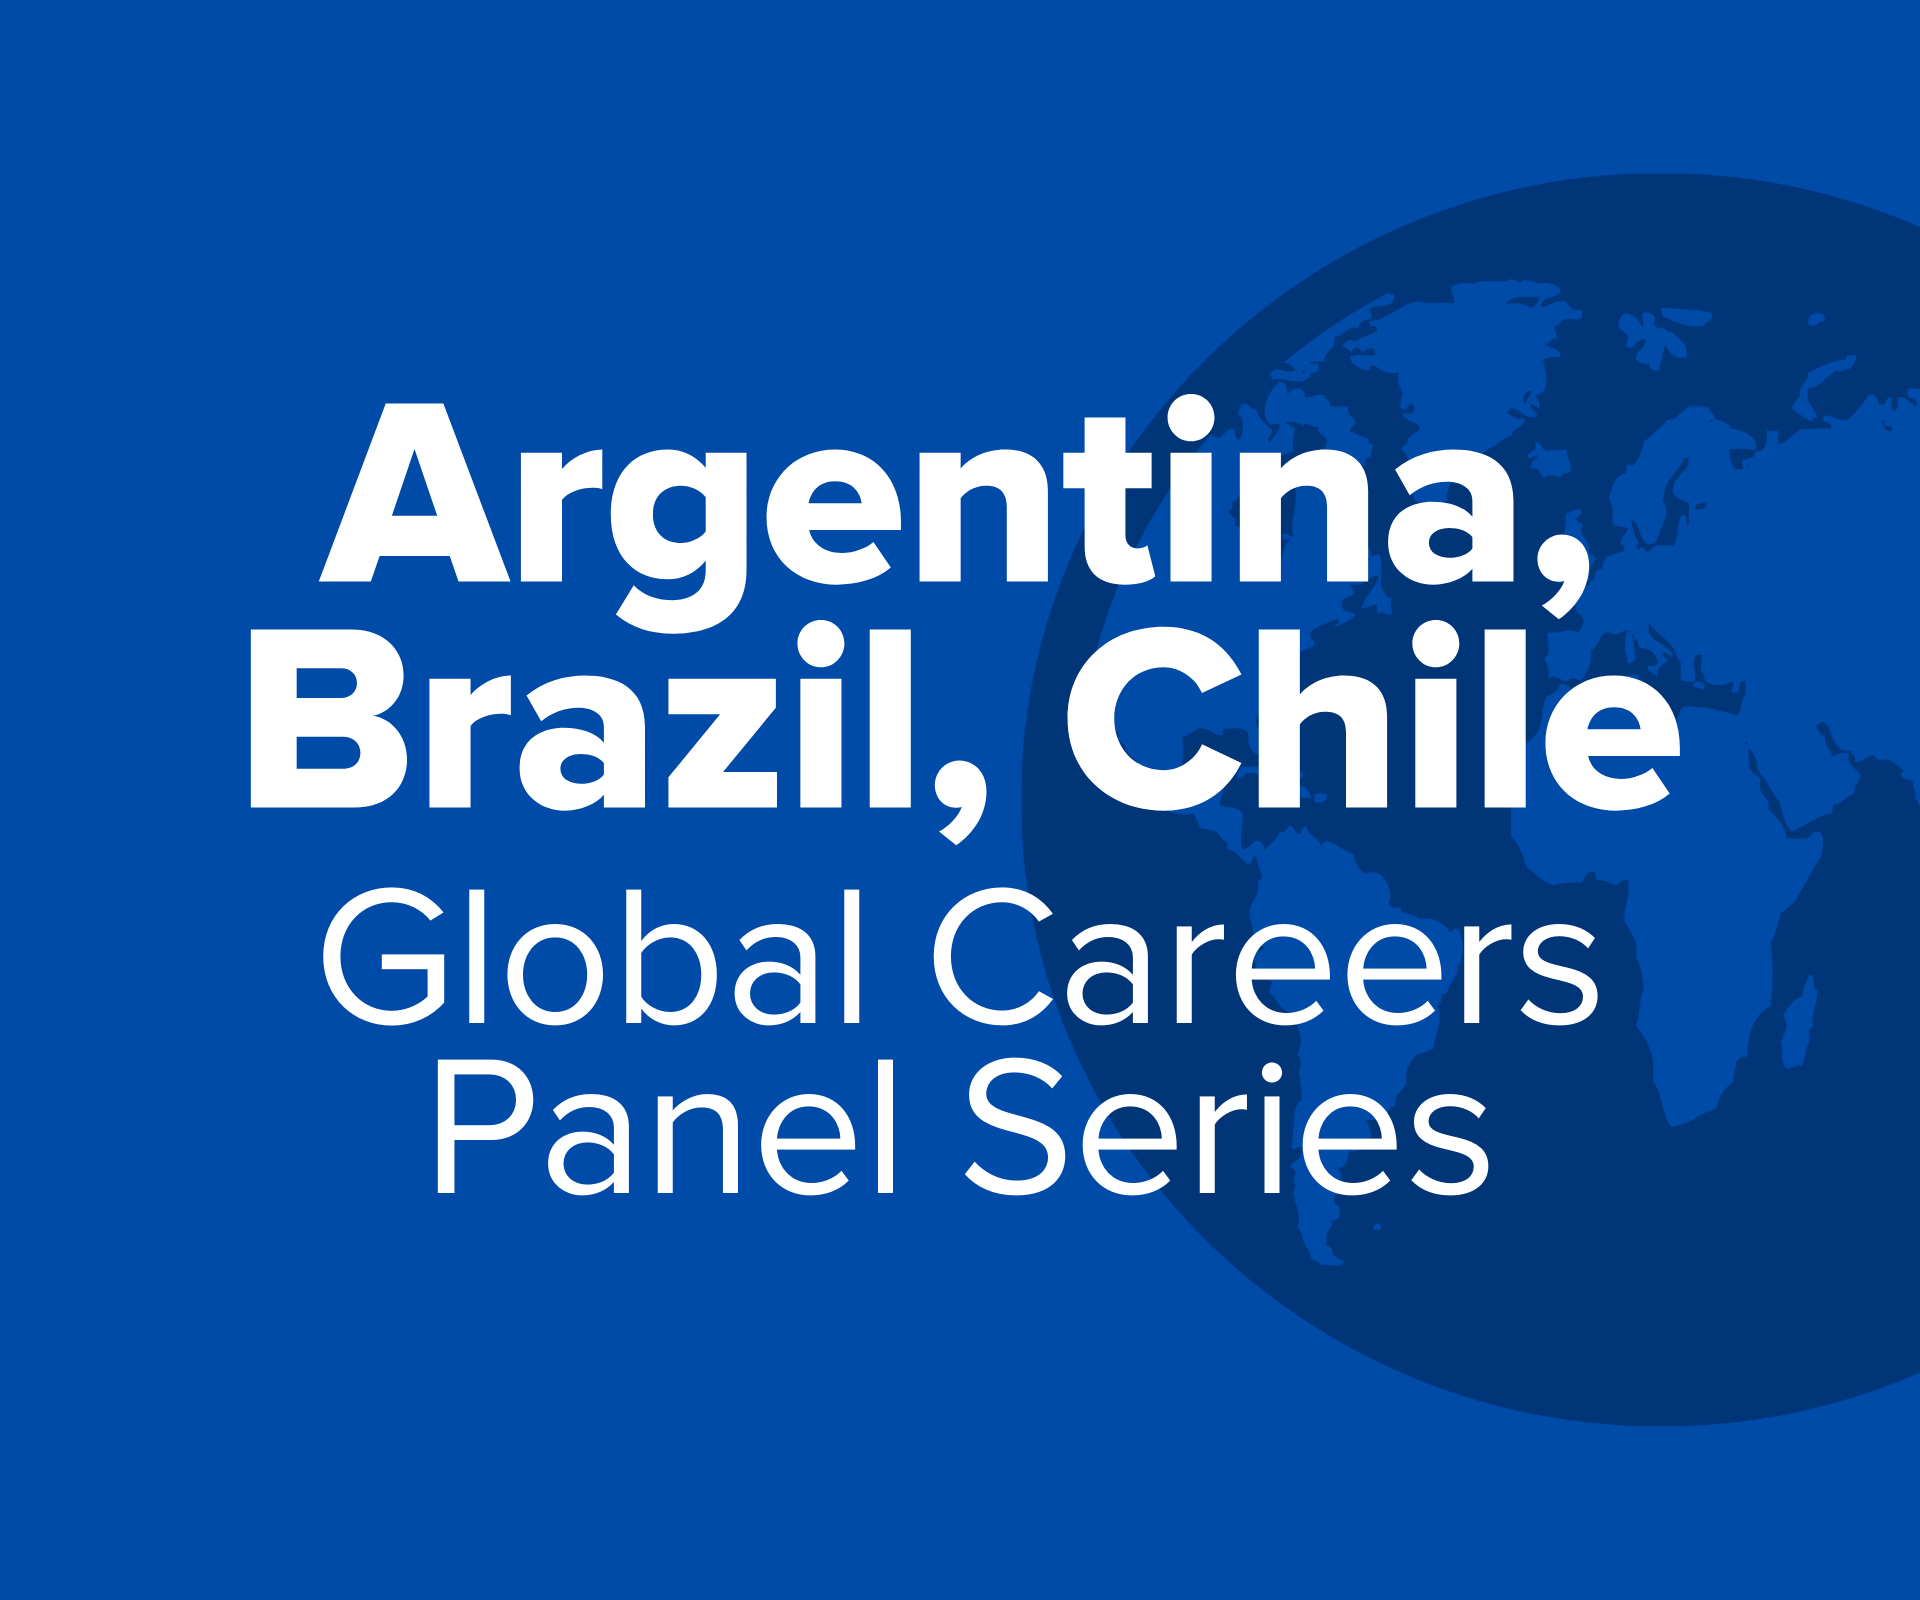 Argentina, Brazil, Chile Global Careers Panel Series